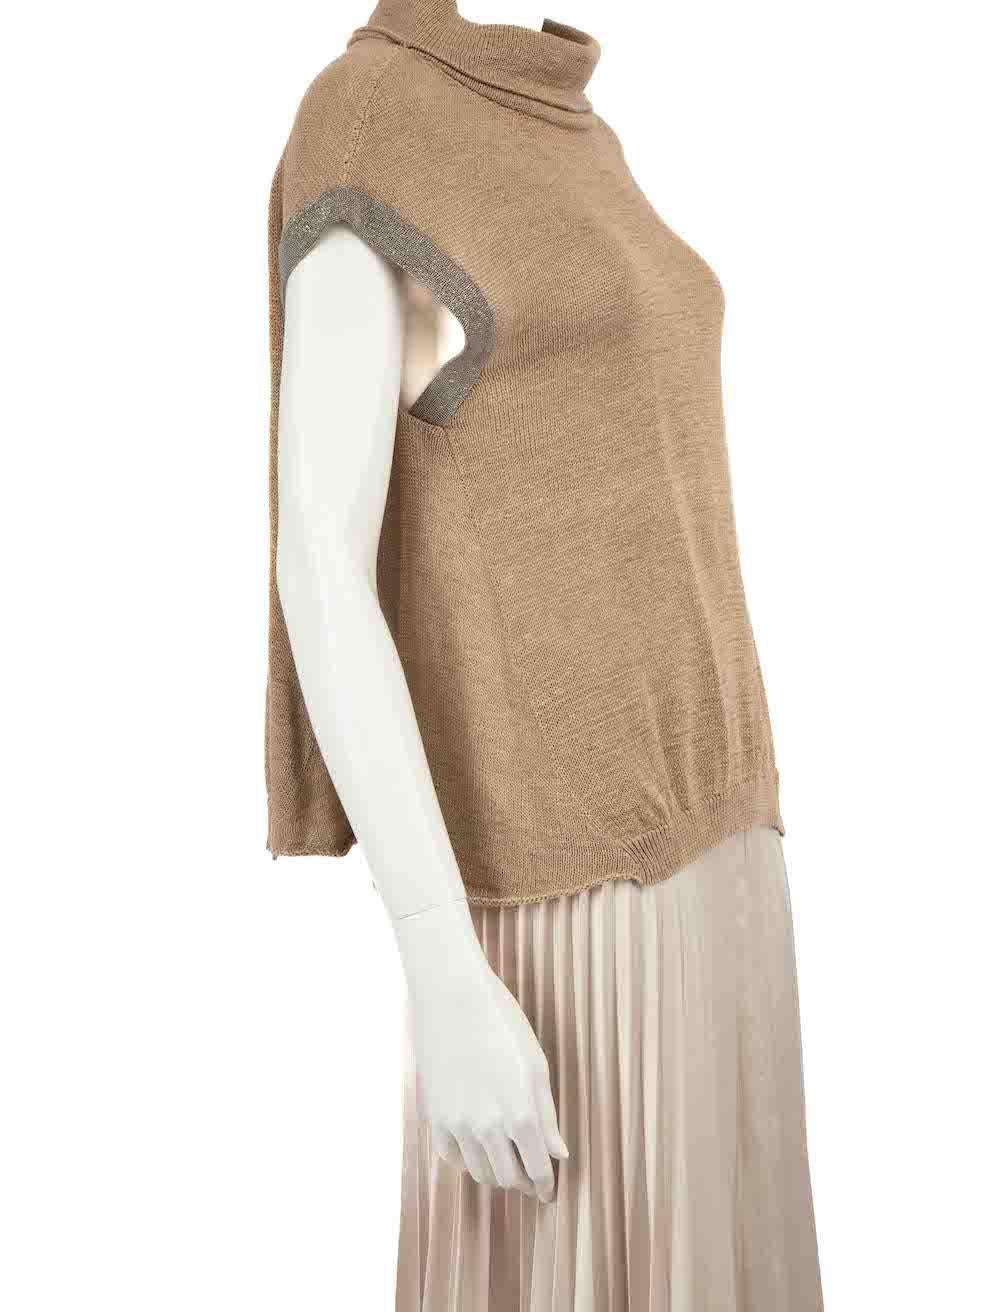 CONDITION is Very good. Hardly any visible wear to jumper is evident on this used Brunello Cucinelli designer resale item.
 
 Details
 Brown
 Cotton
 Knit top
 Beaded detail
 Mock Neck
 
 
 Made in Italy
 
 Composition
 100% Cotton
 
 Care